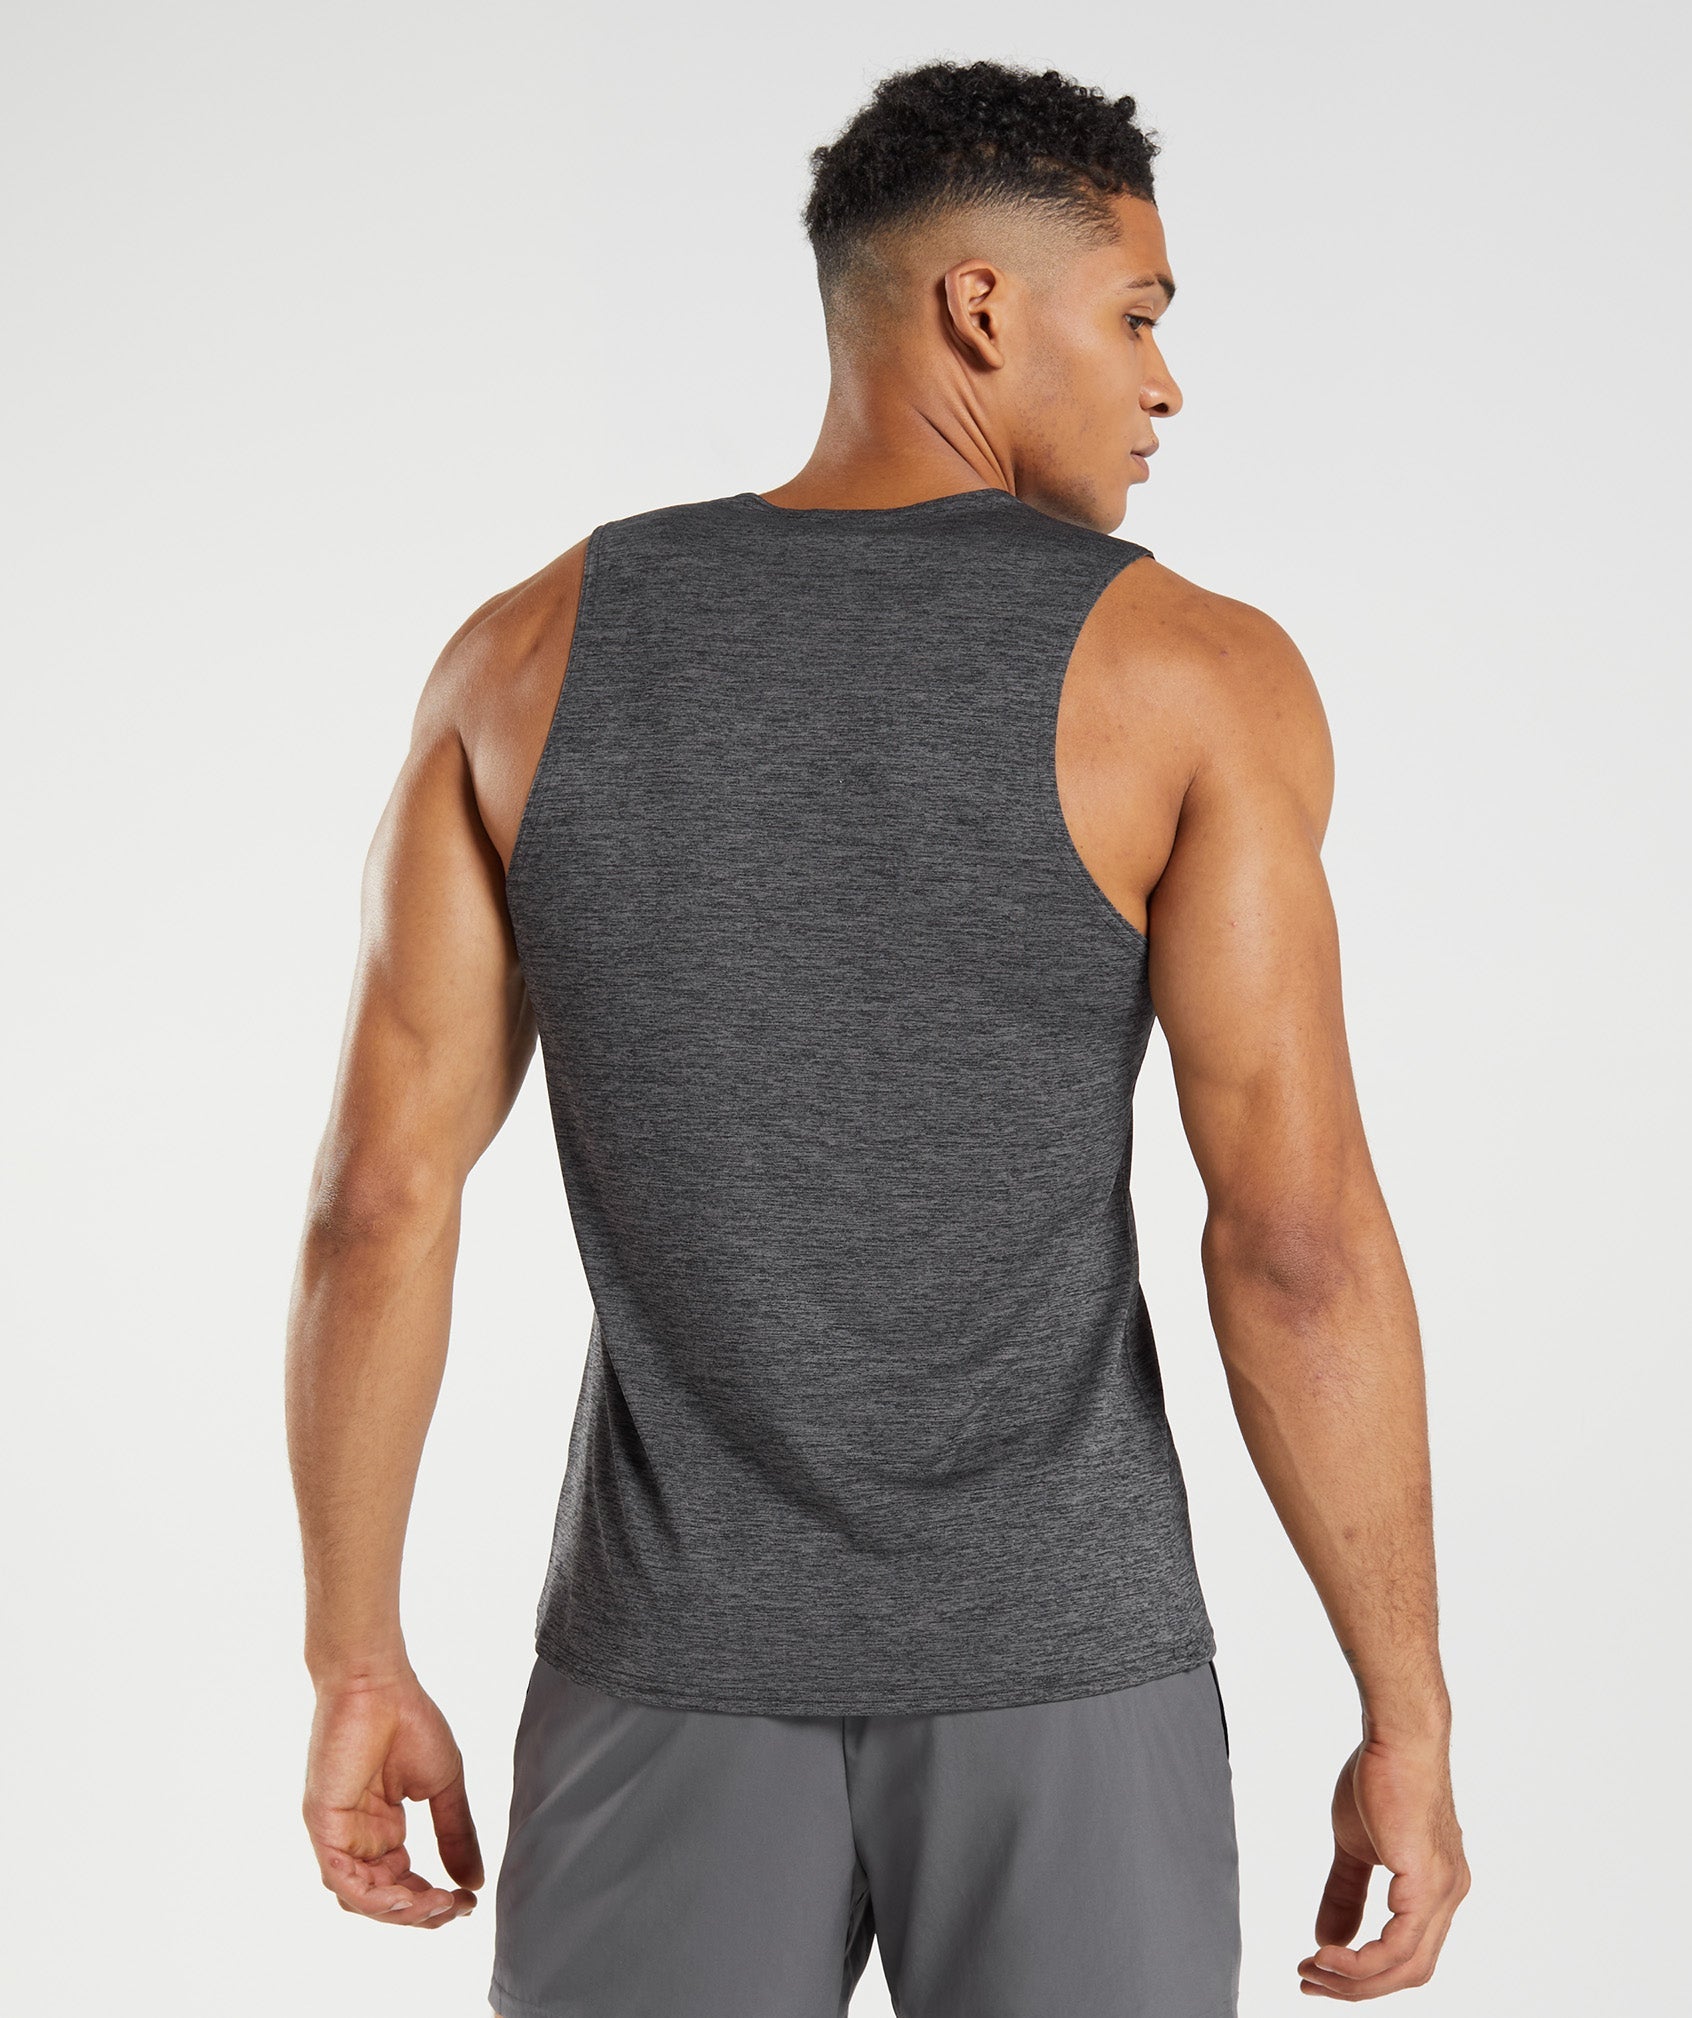 Athletic Works Tank Tops for Men - Performance and Style for